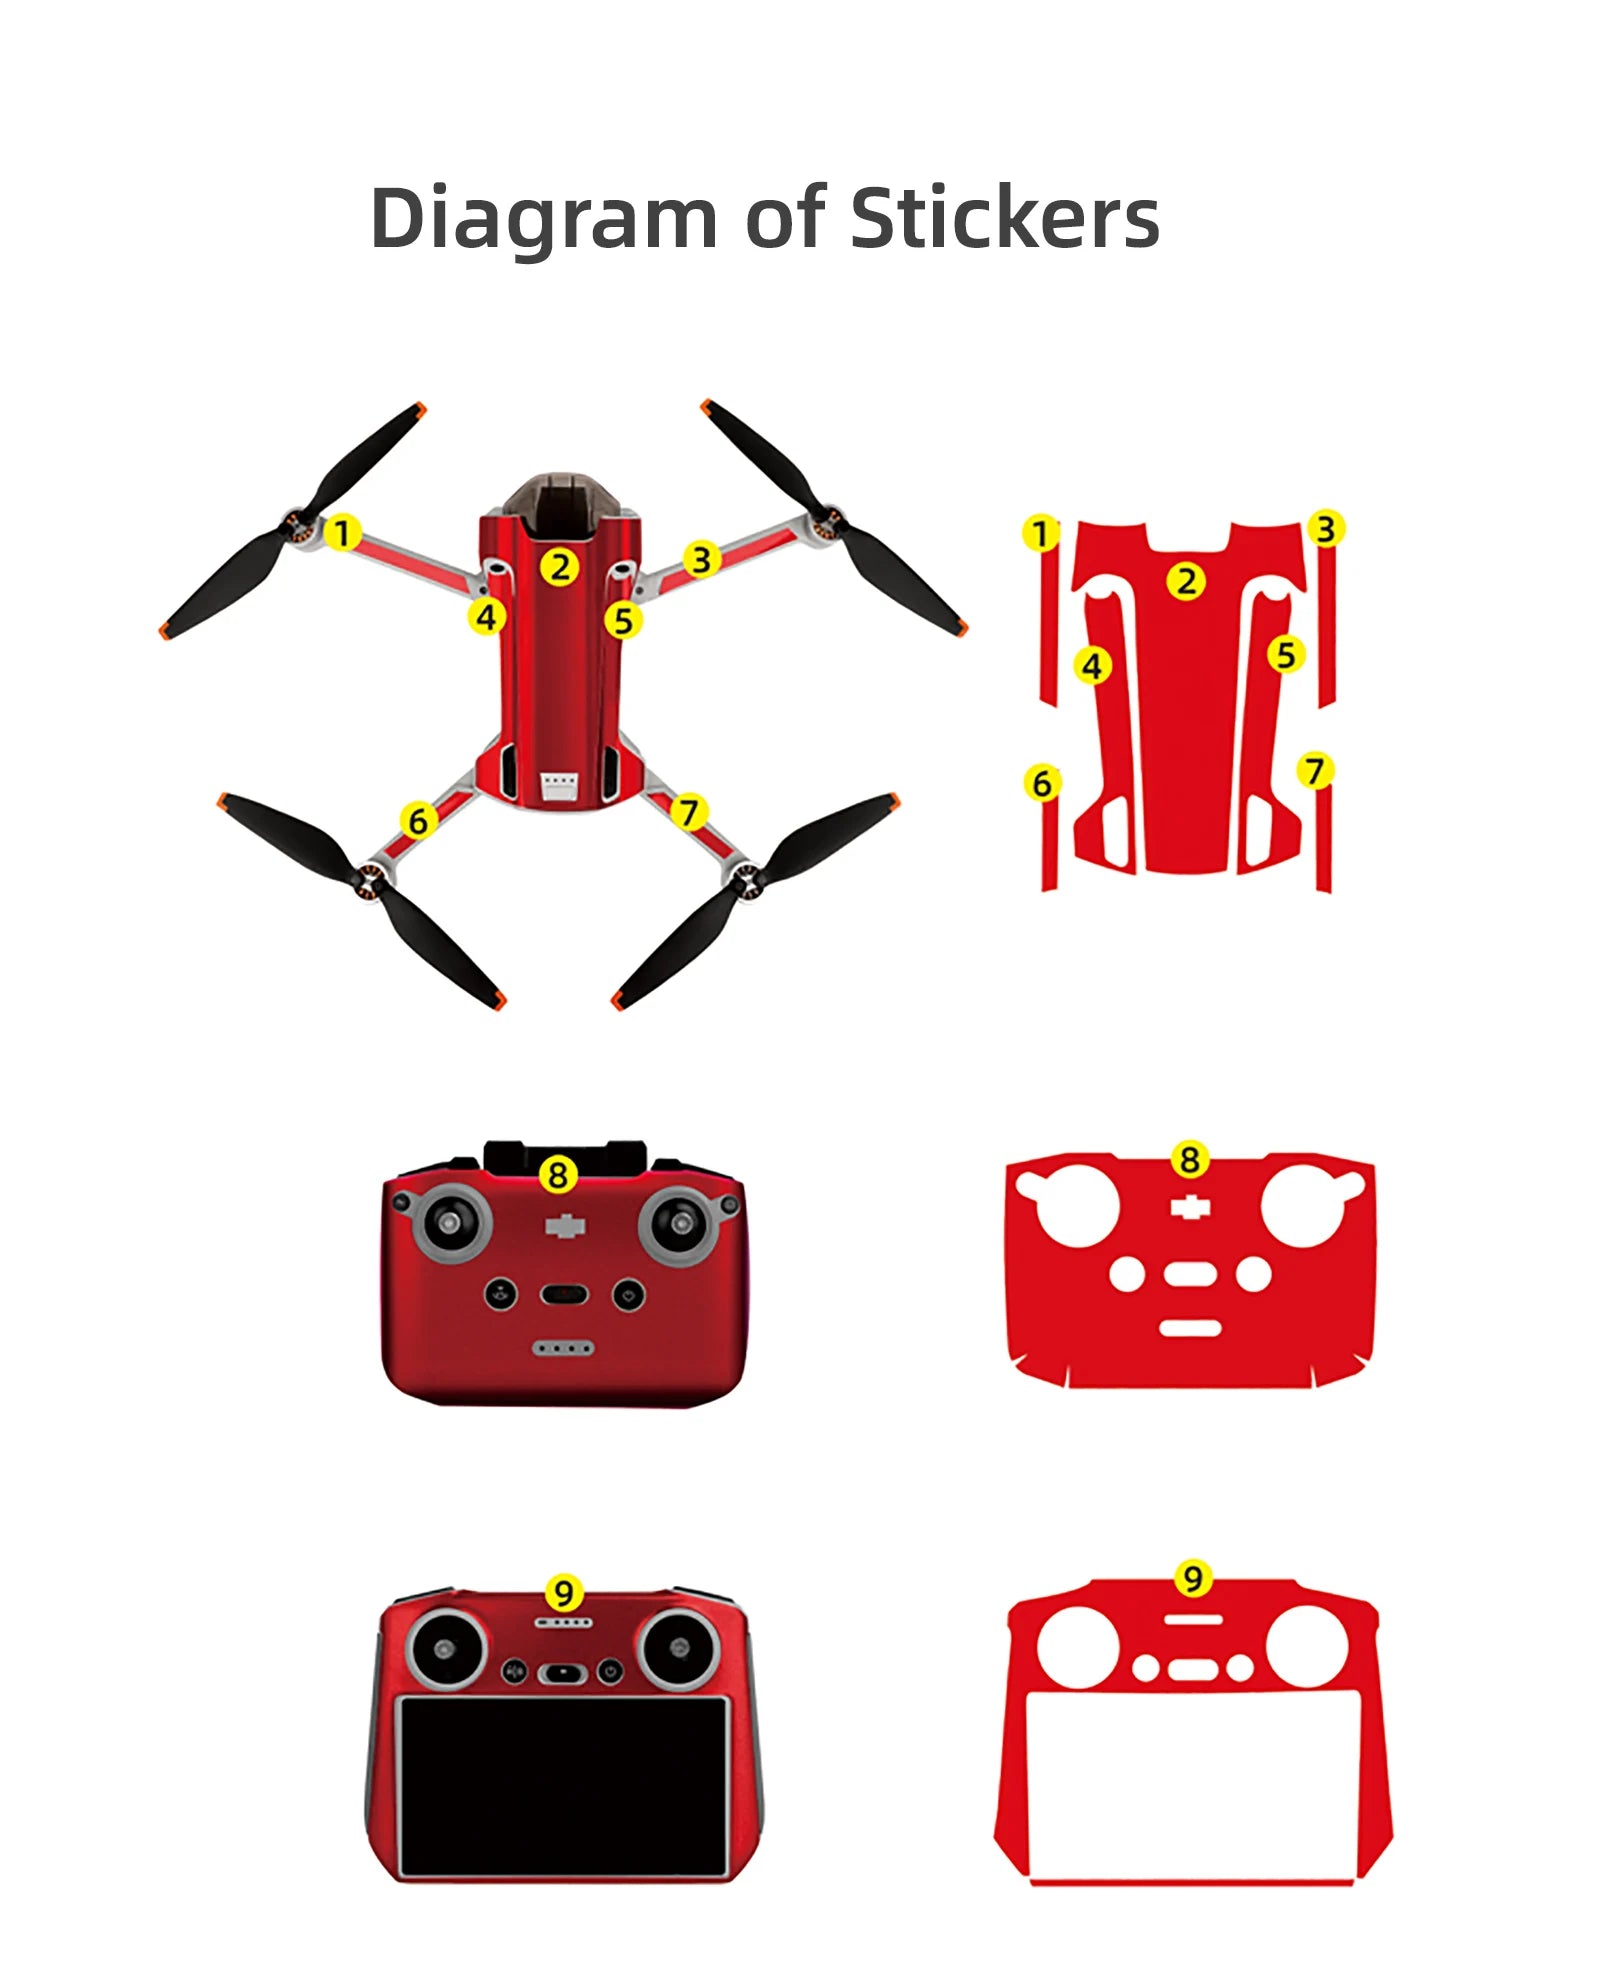 DJI mini 3 pro stickers Stickers stick repeatedly without leaving glue 2.Imported removable P